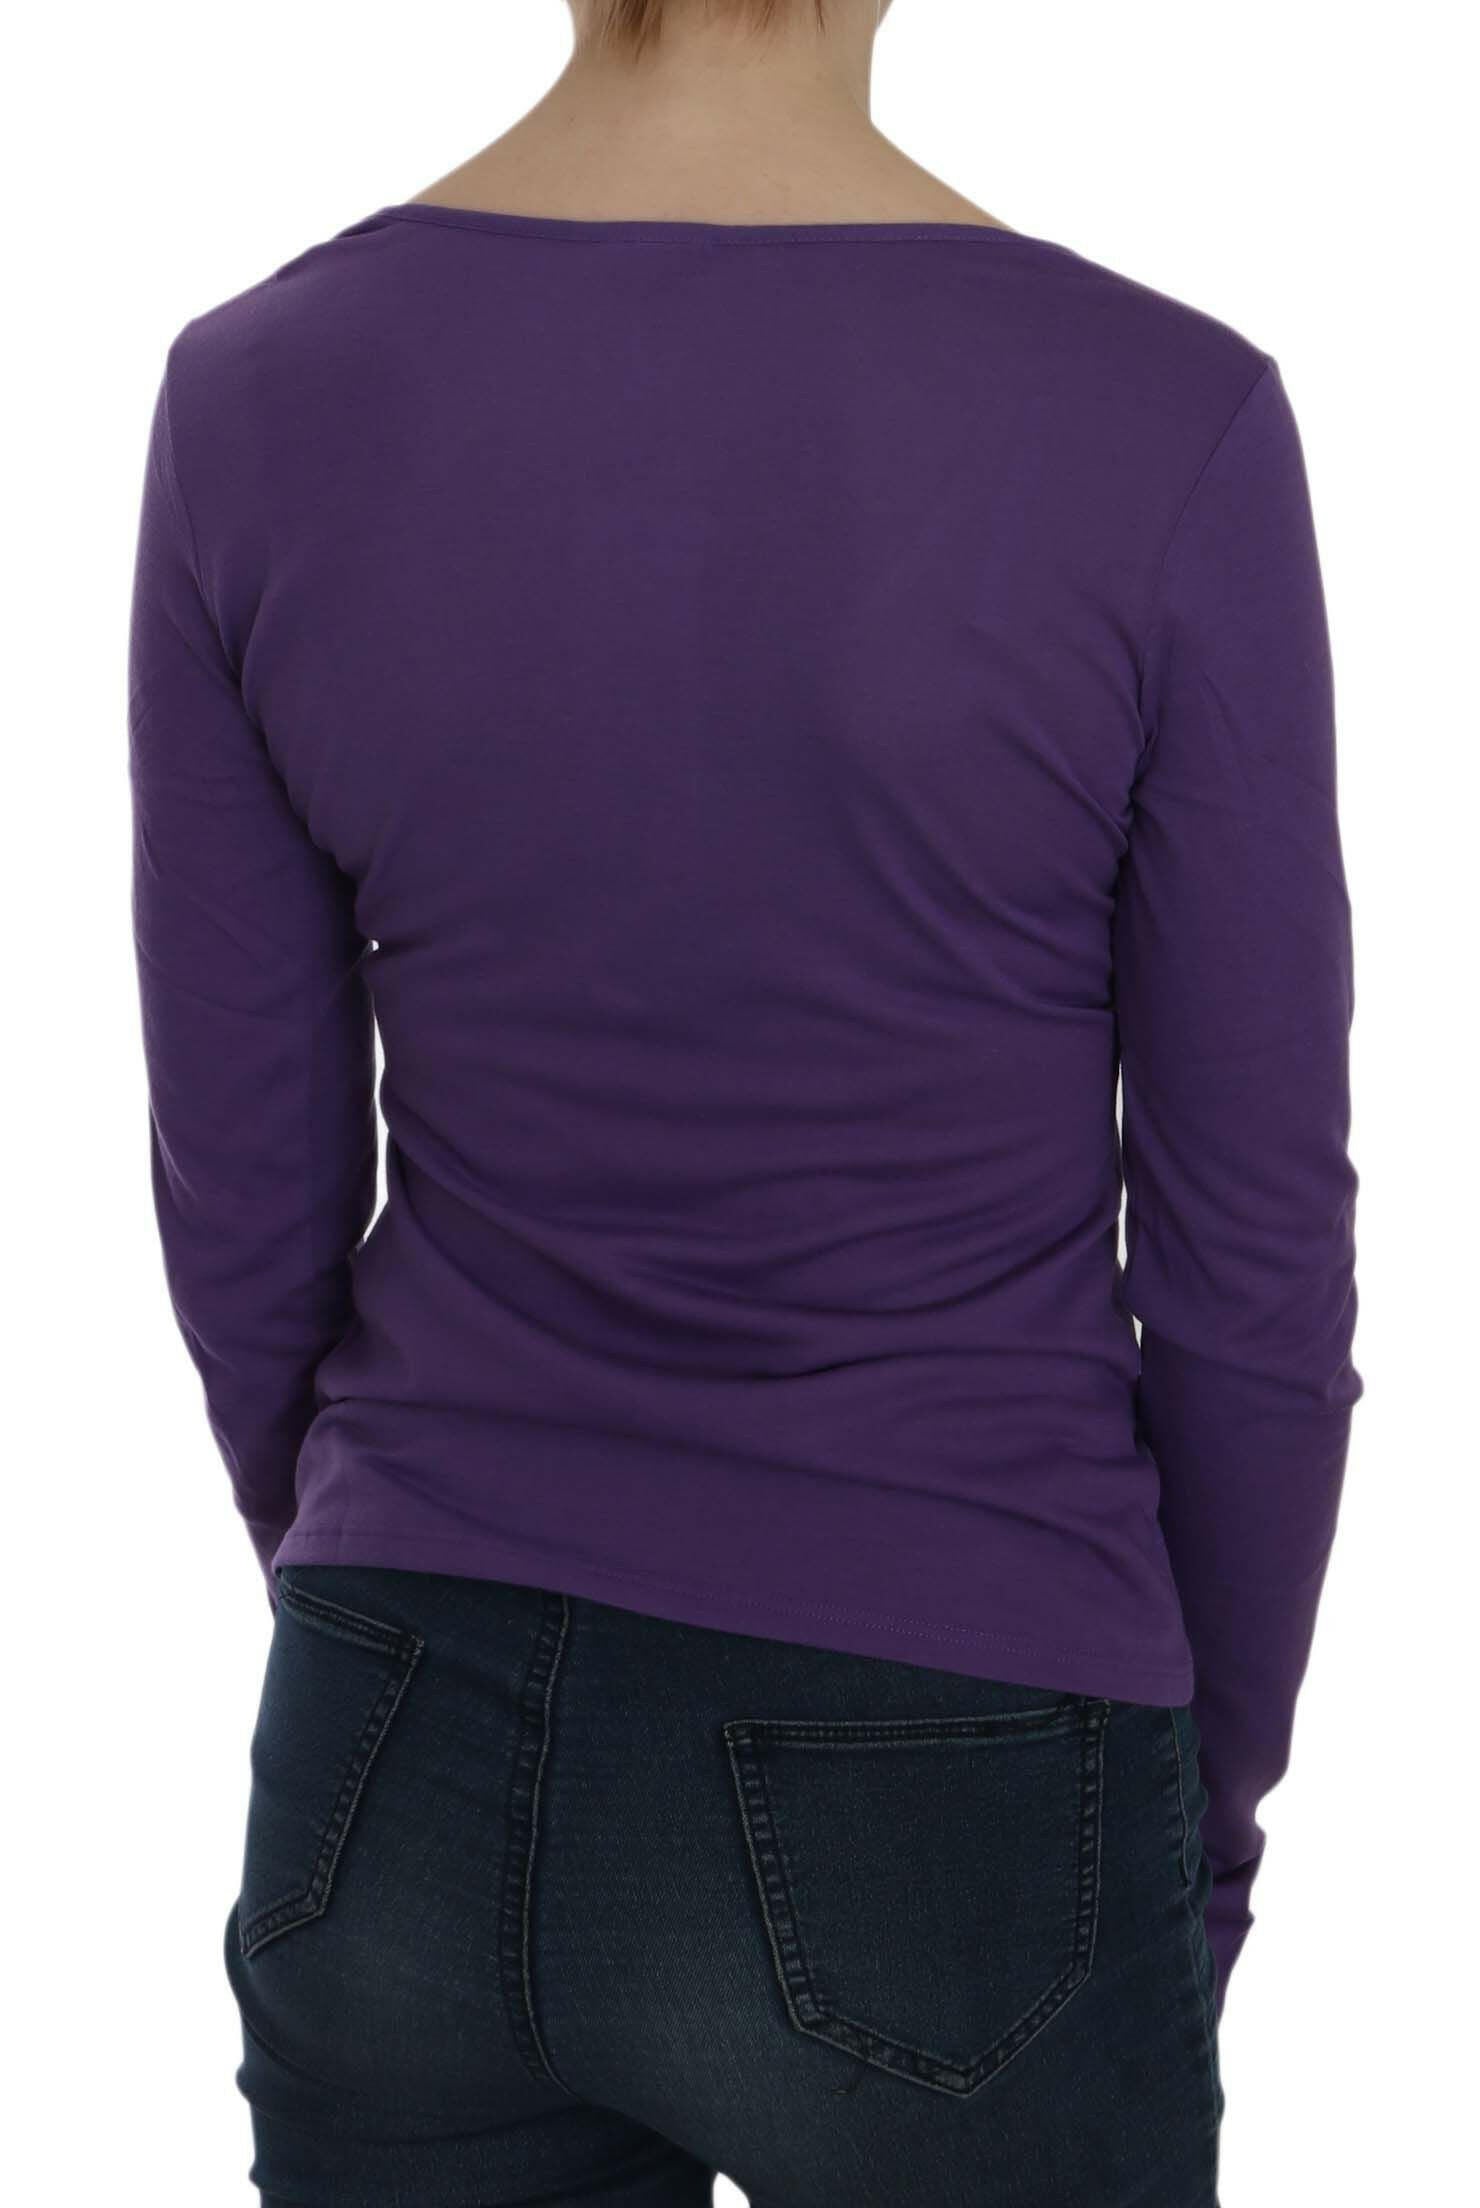 Exte Purple Crystal Embellished Long Sleeve Casual Top - GENUINE AUTHENTIC BRAND LLC  